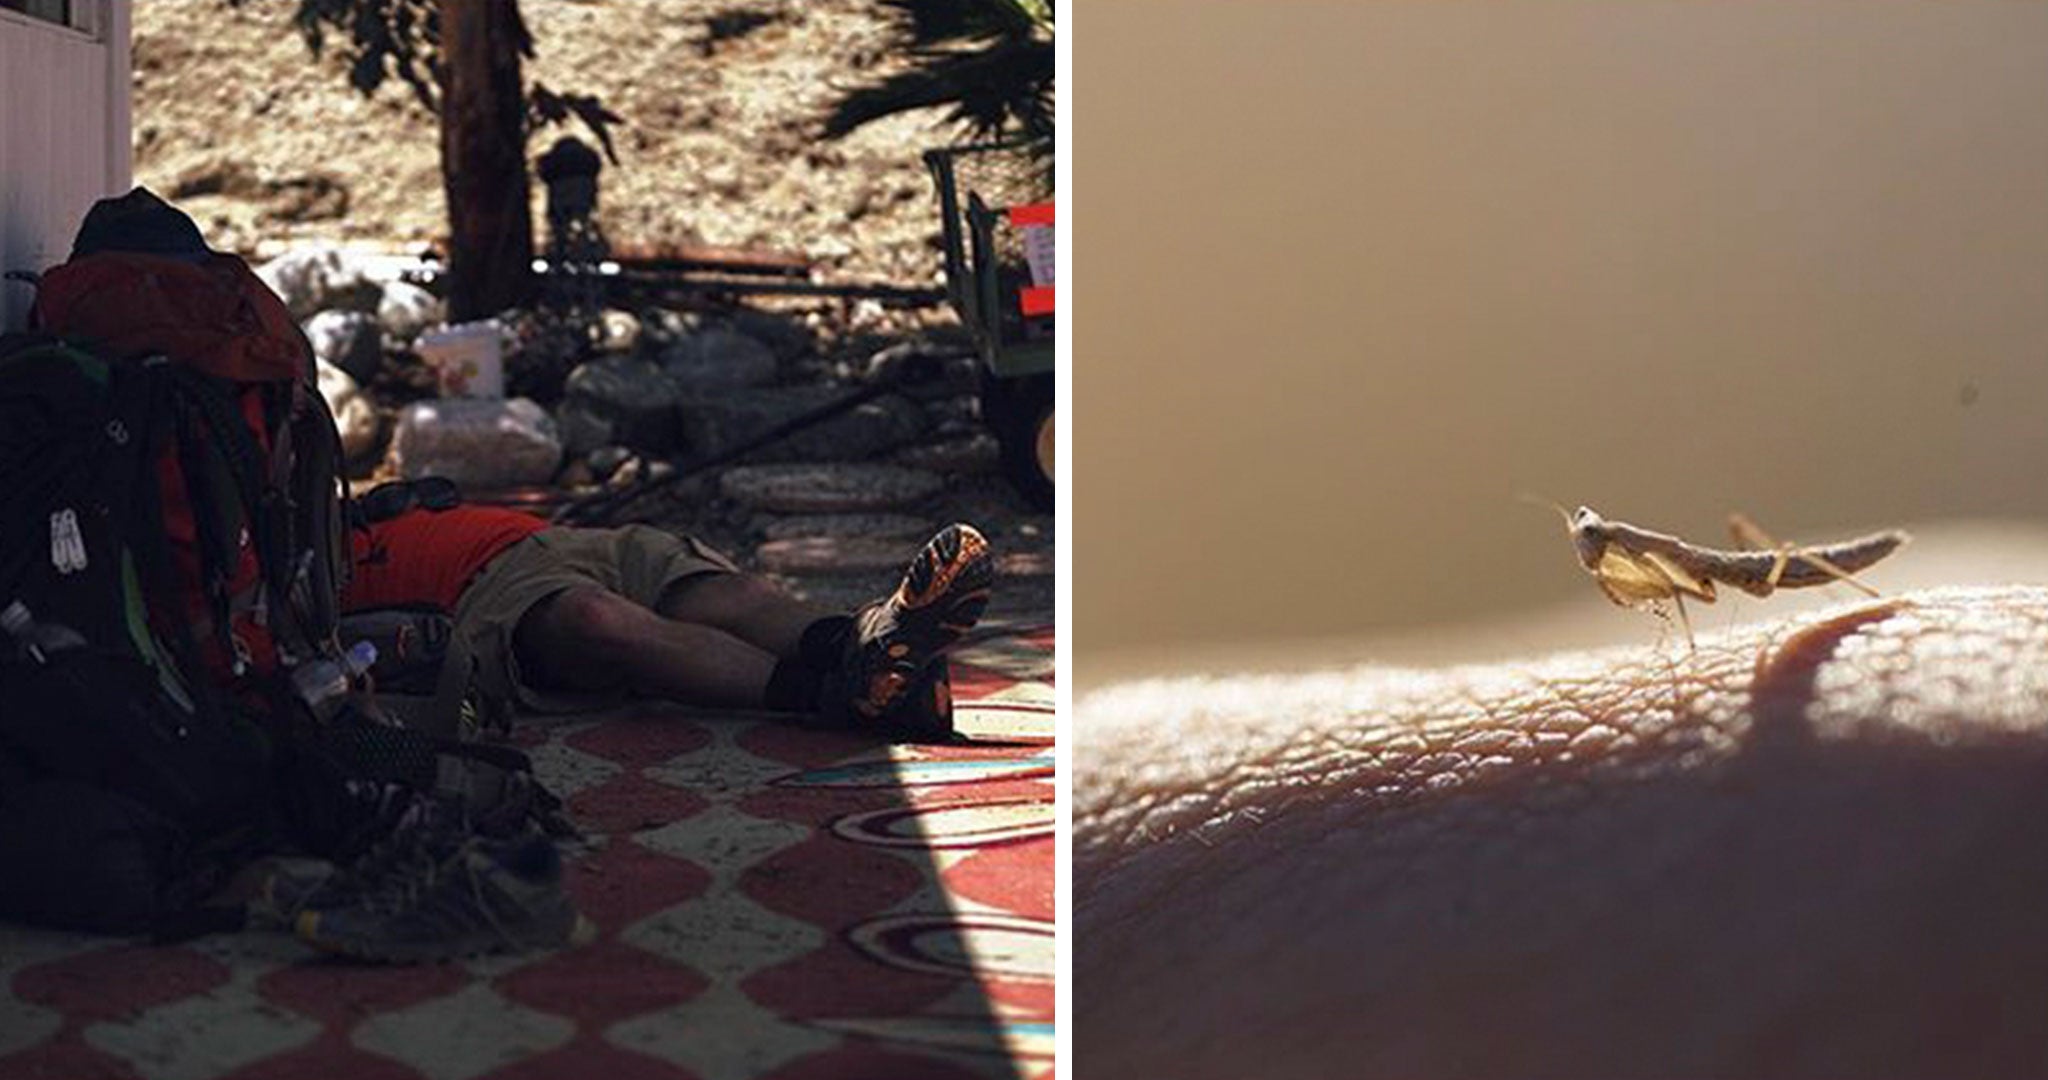 Sleeping ultralight backpacker and close-up of an insect on skin